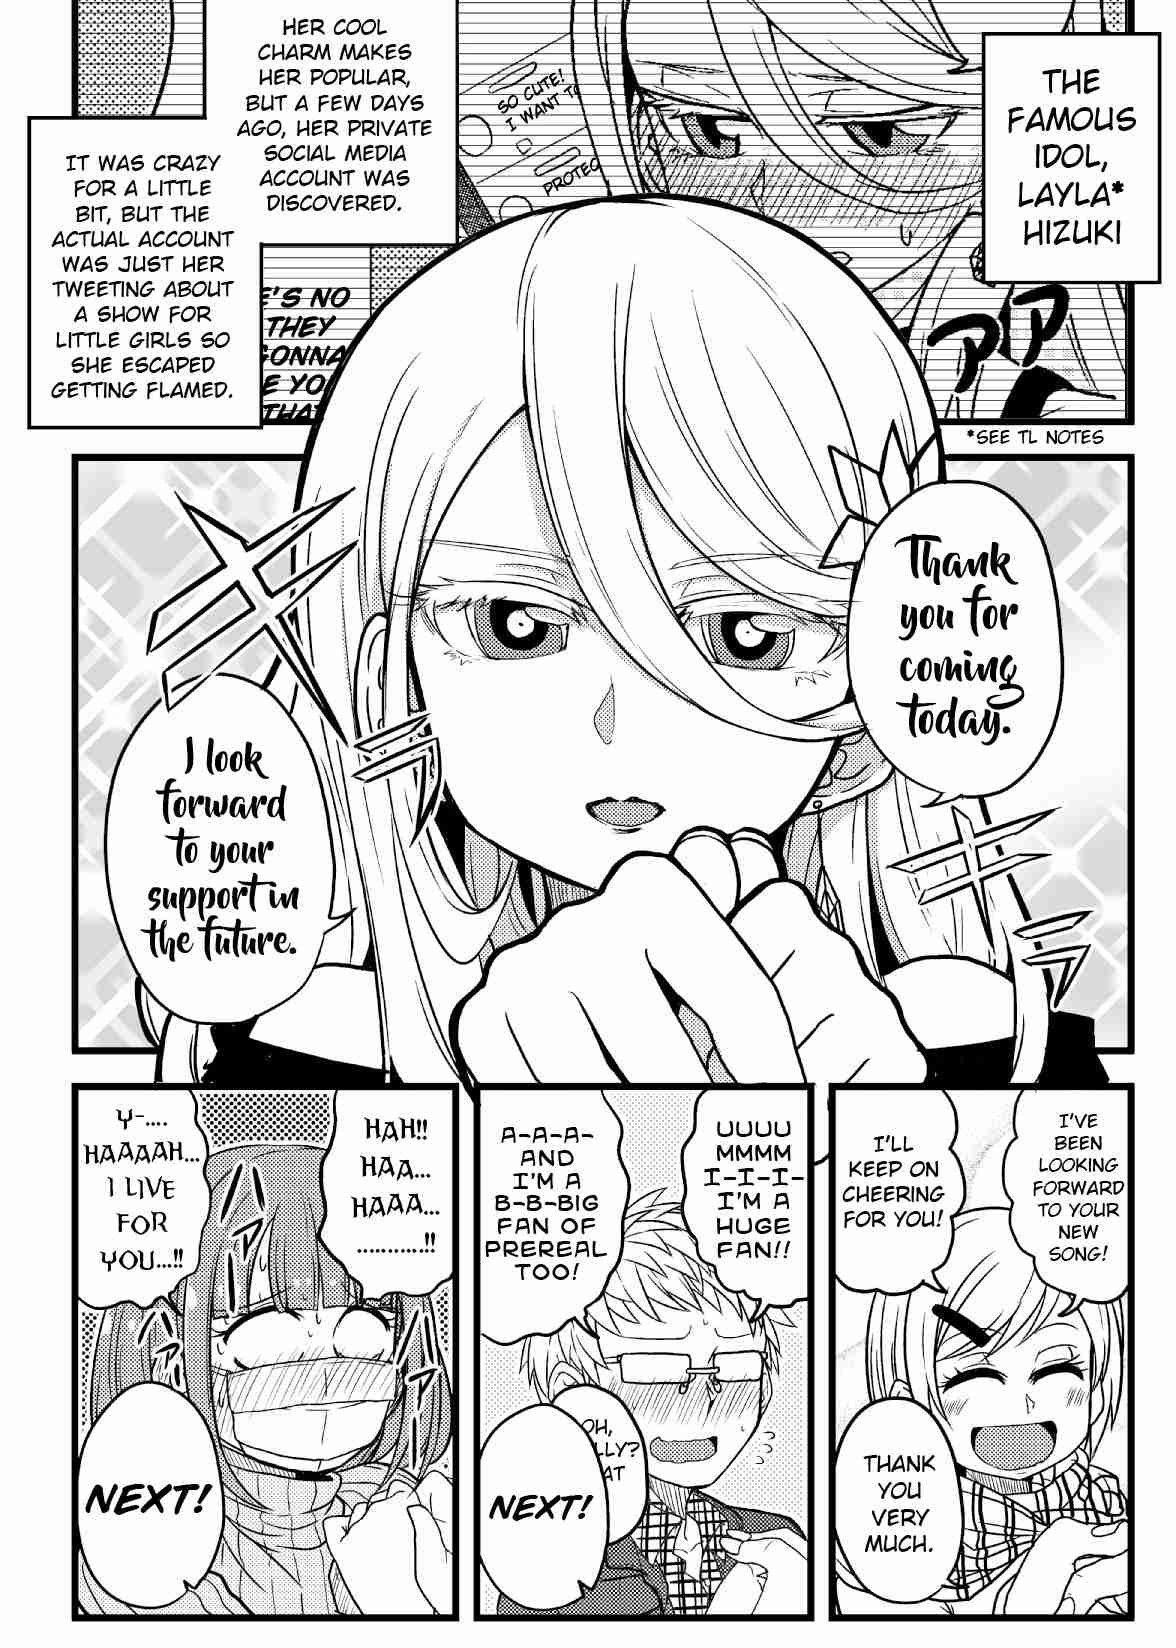 A Cool Idol’s Private Account Uncovered Ch. 2